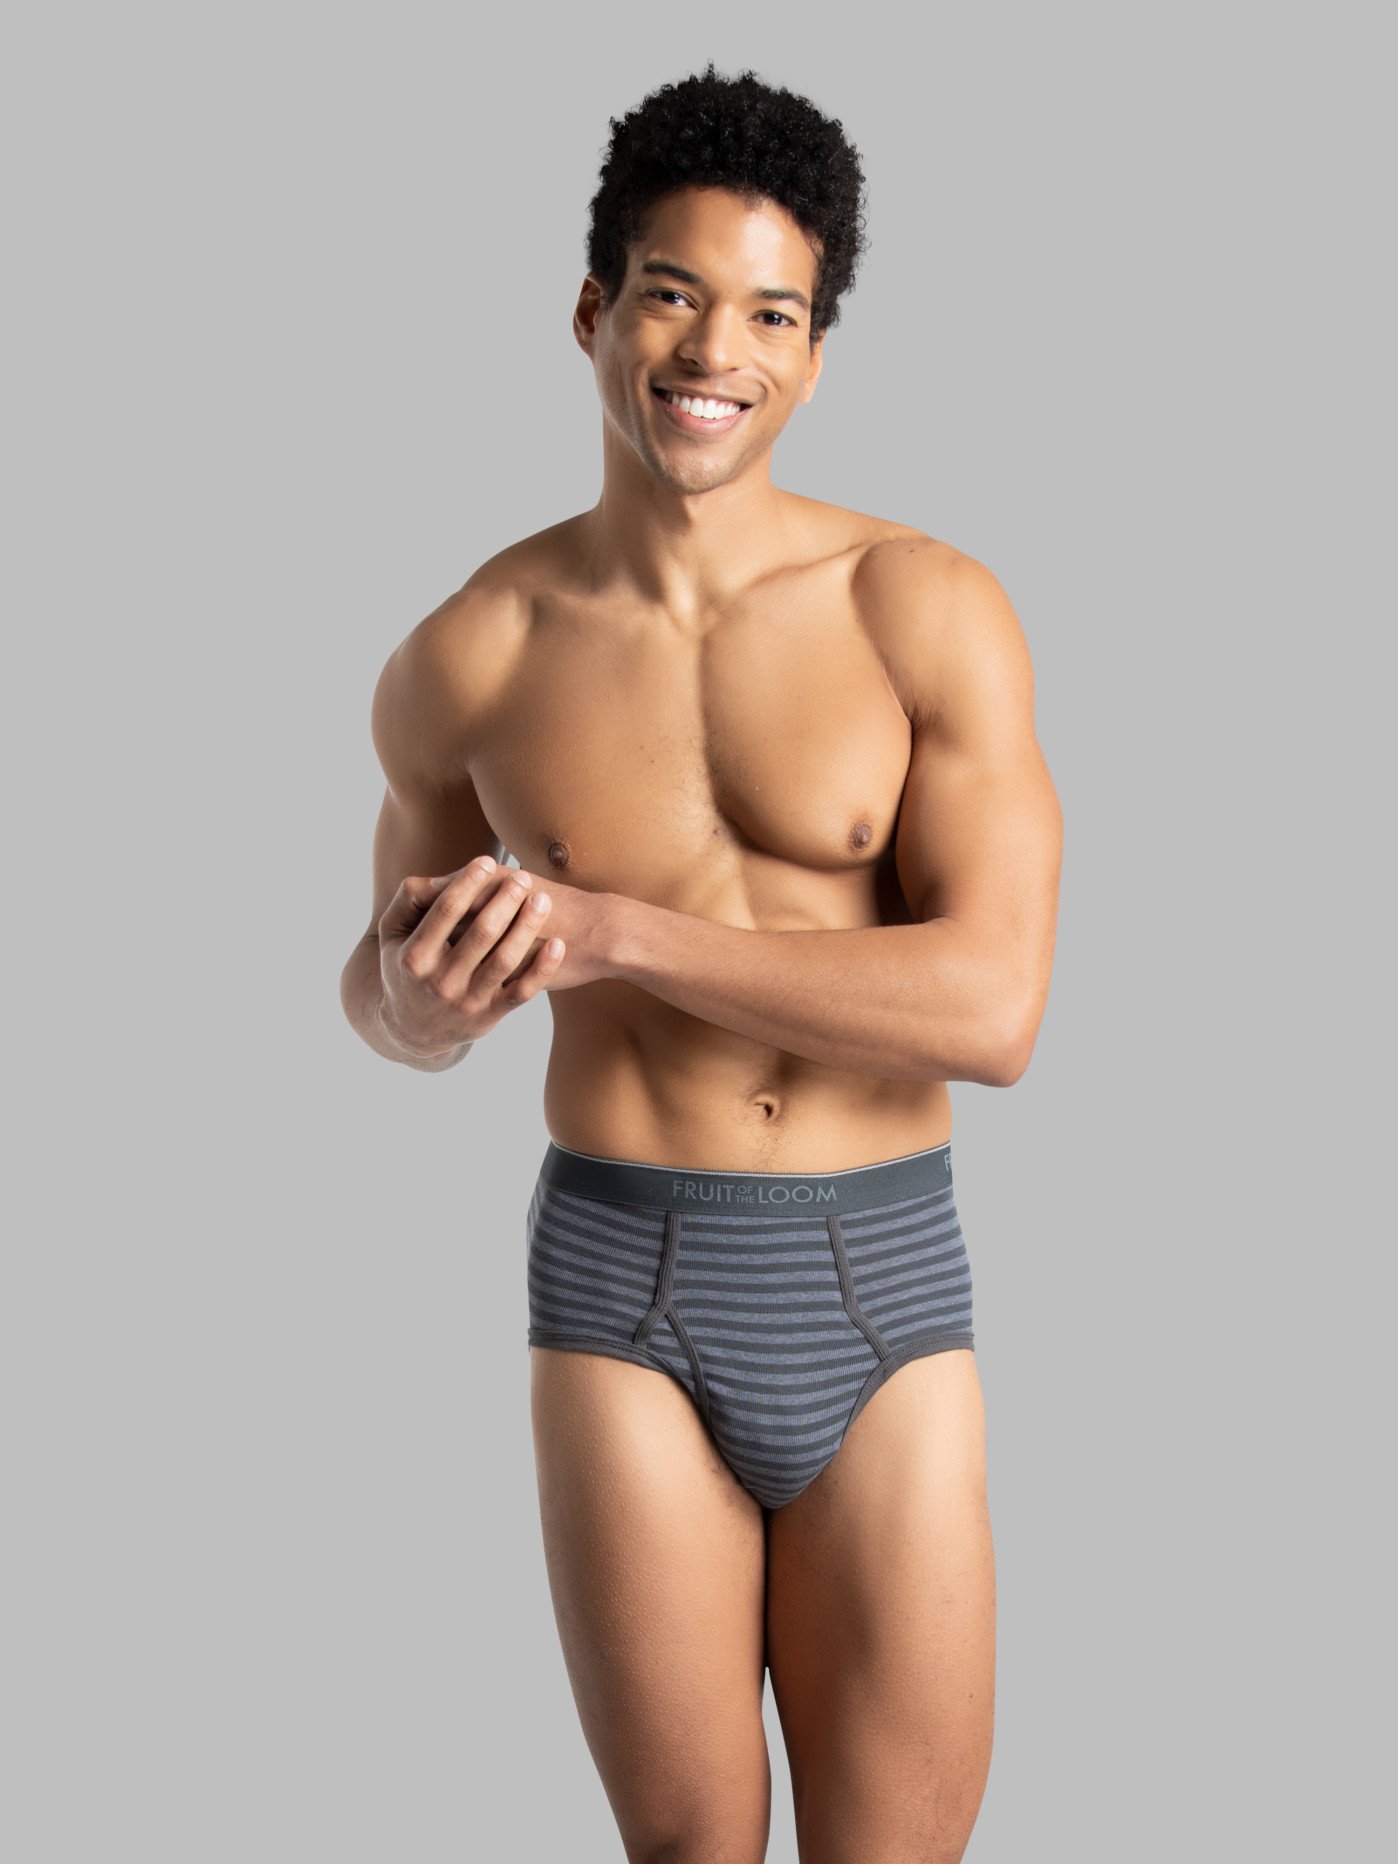 Fruit of the Loom 5 Pack Solid Fashion Brief (5P4609) S/Assorted at   Men's Clothing store: Briefs Underwear